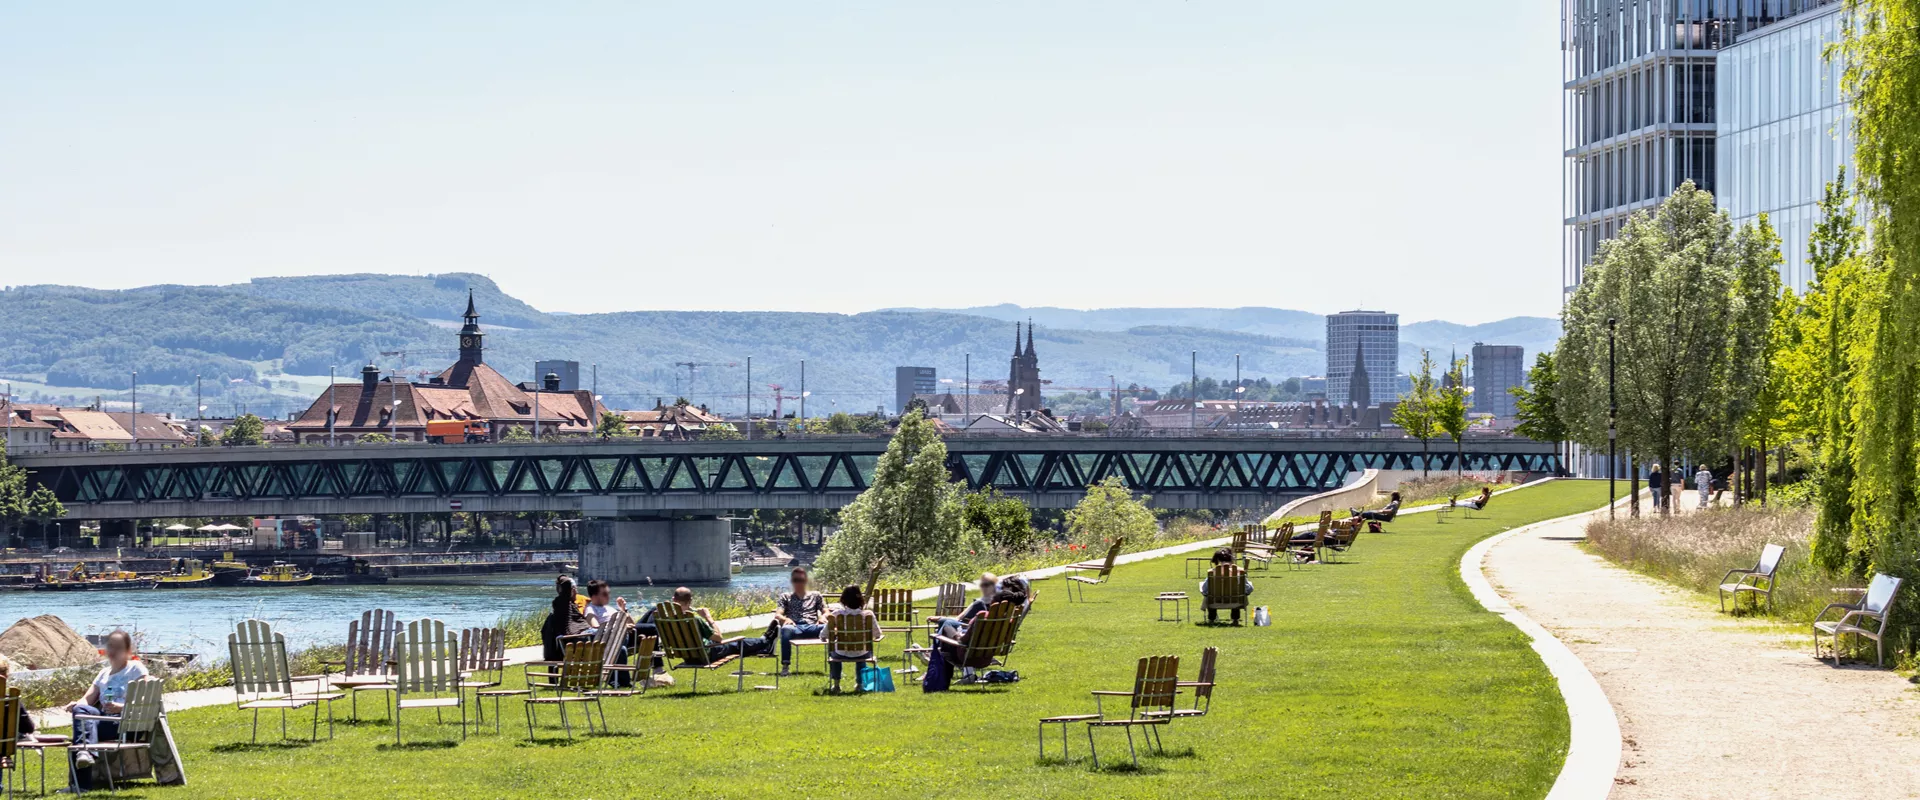 A panoramic view of Basel, from the Novartis Campus with people lounging in the foreground and the black forest in the background